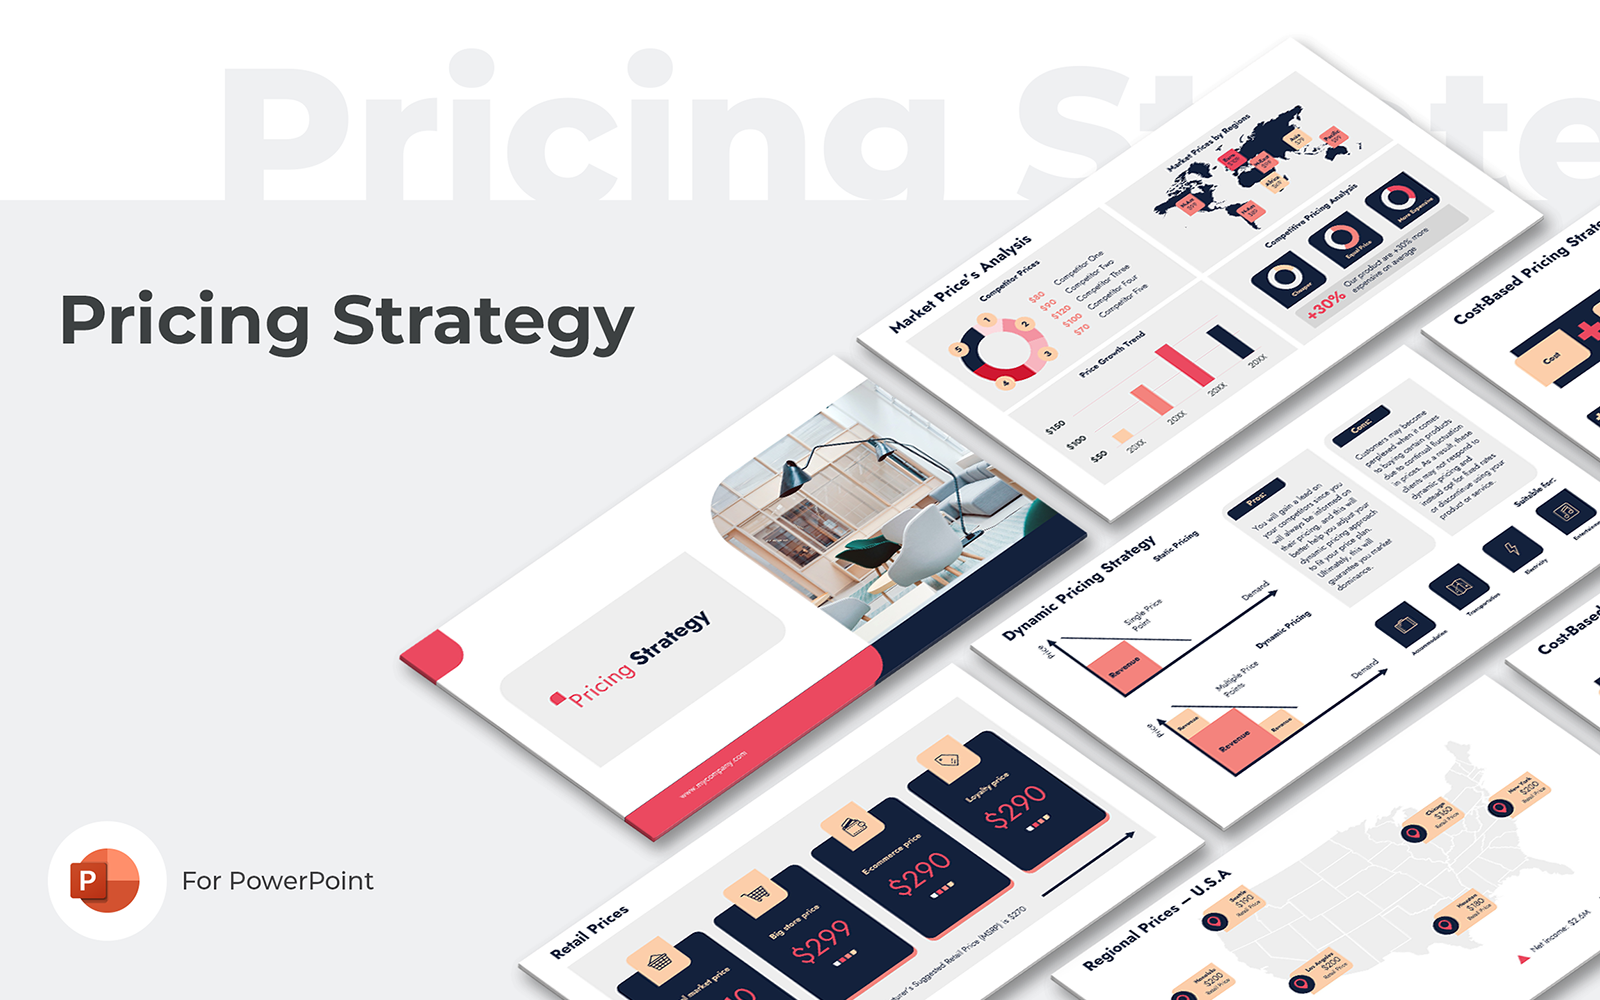 Pricing Strategy PowerPoint Presentation Template